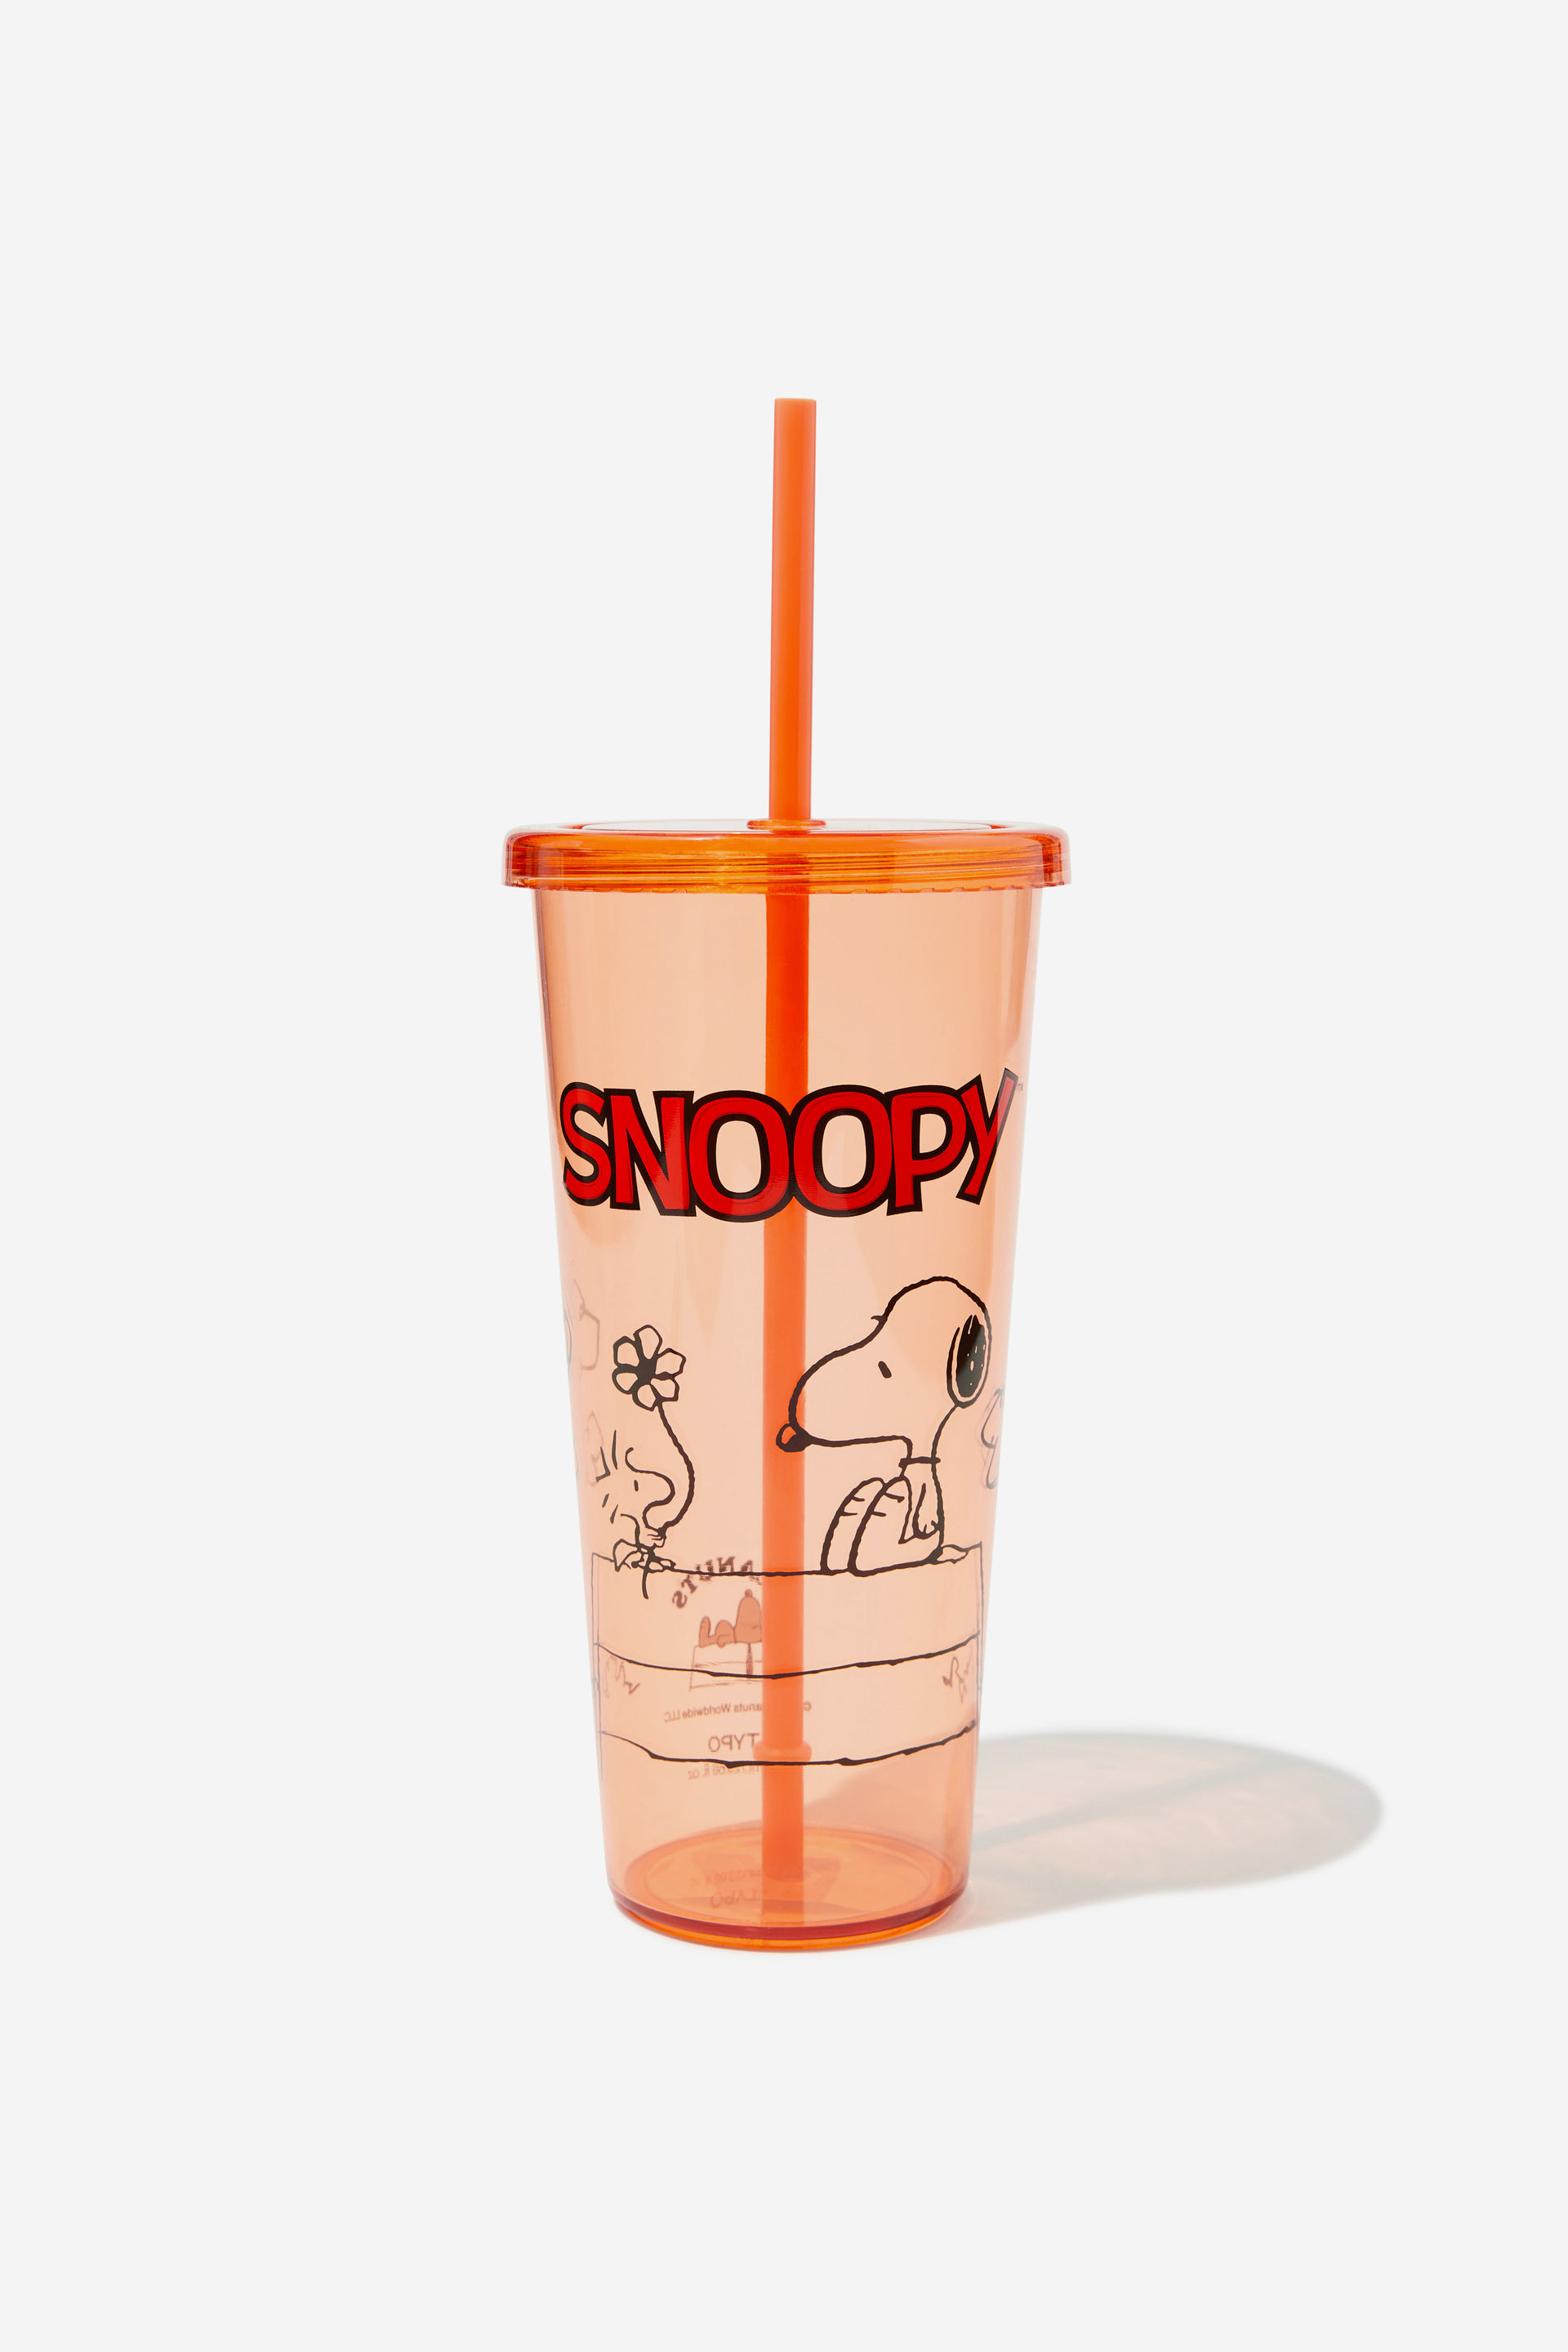 Typo - Snoopy Sipper Smoothie Cup - Lcn pea snoopy peach